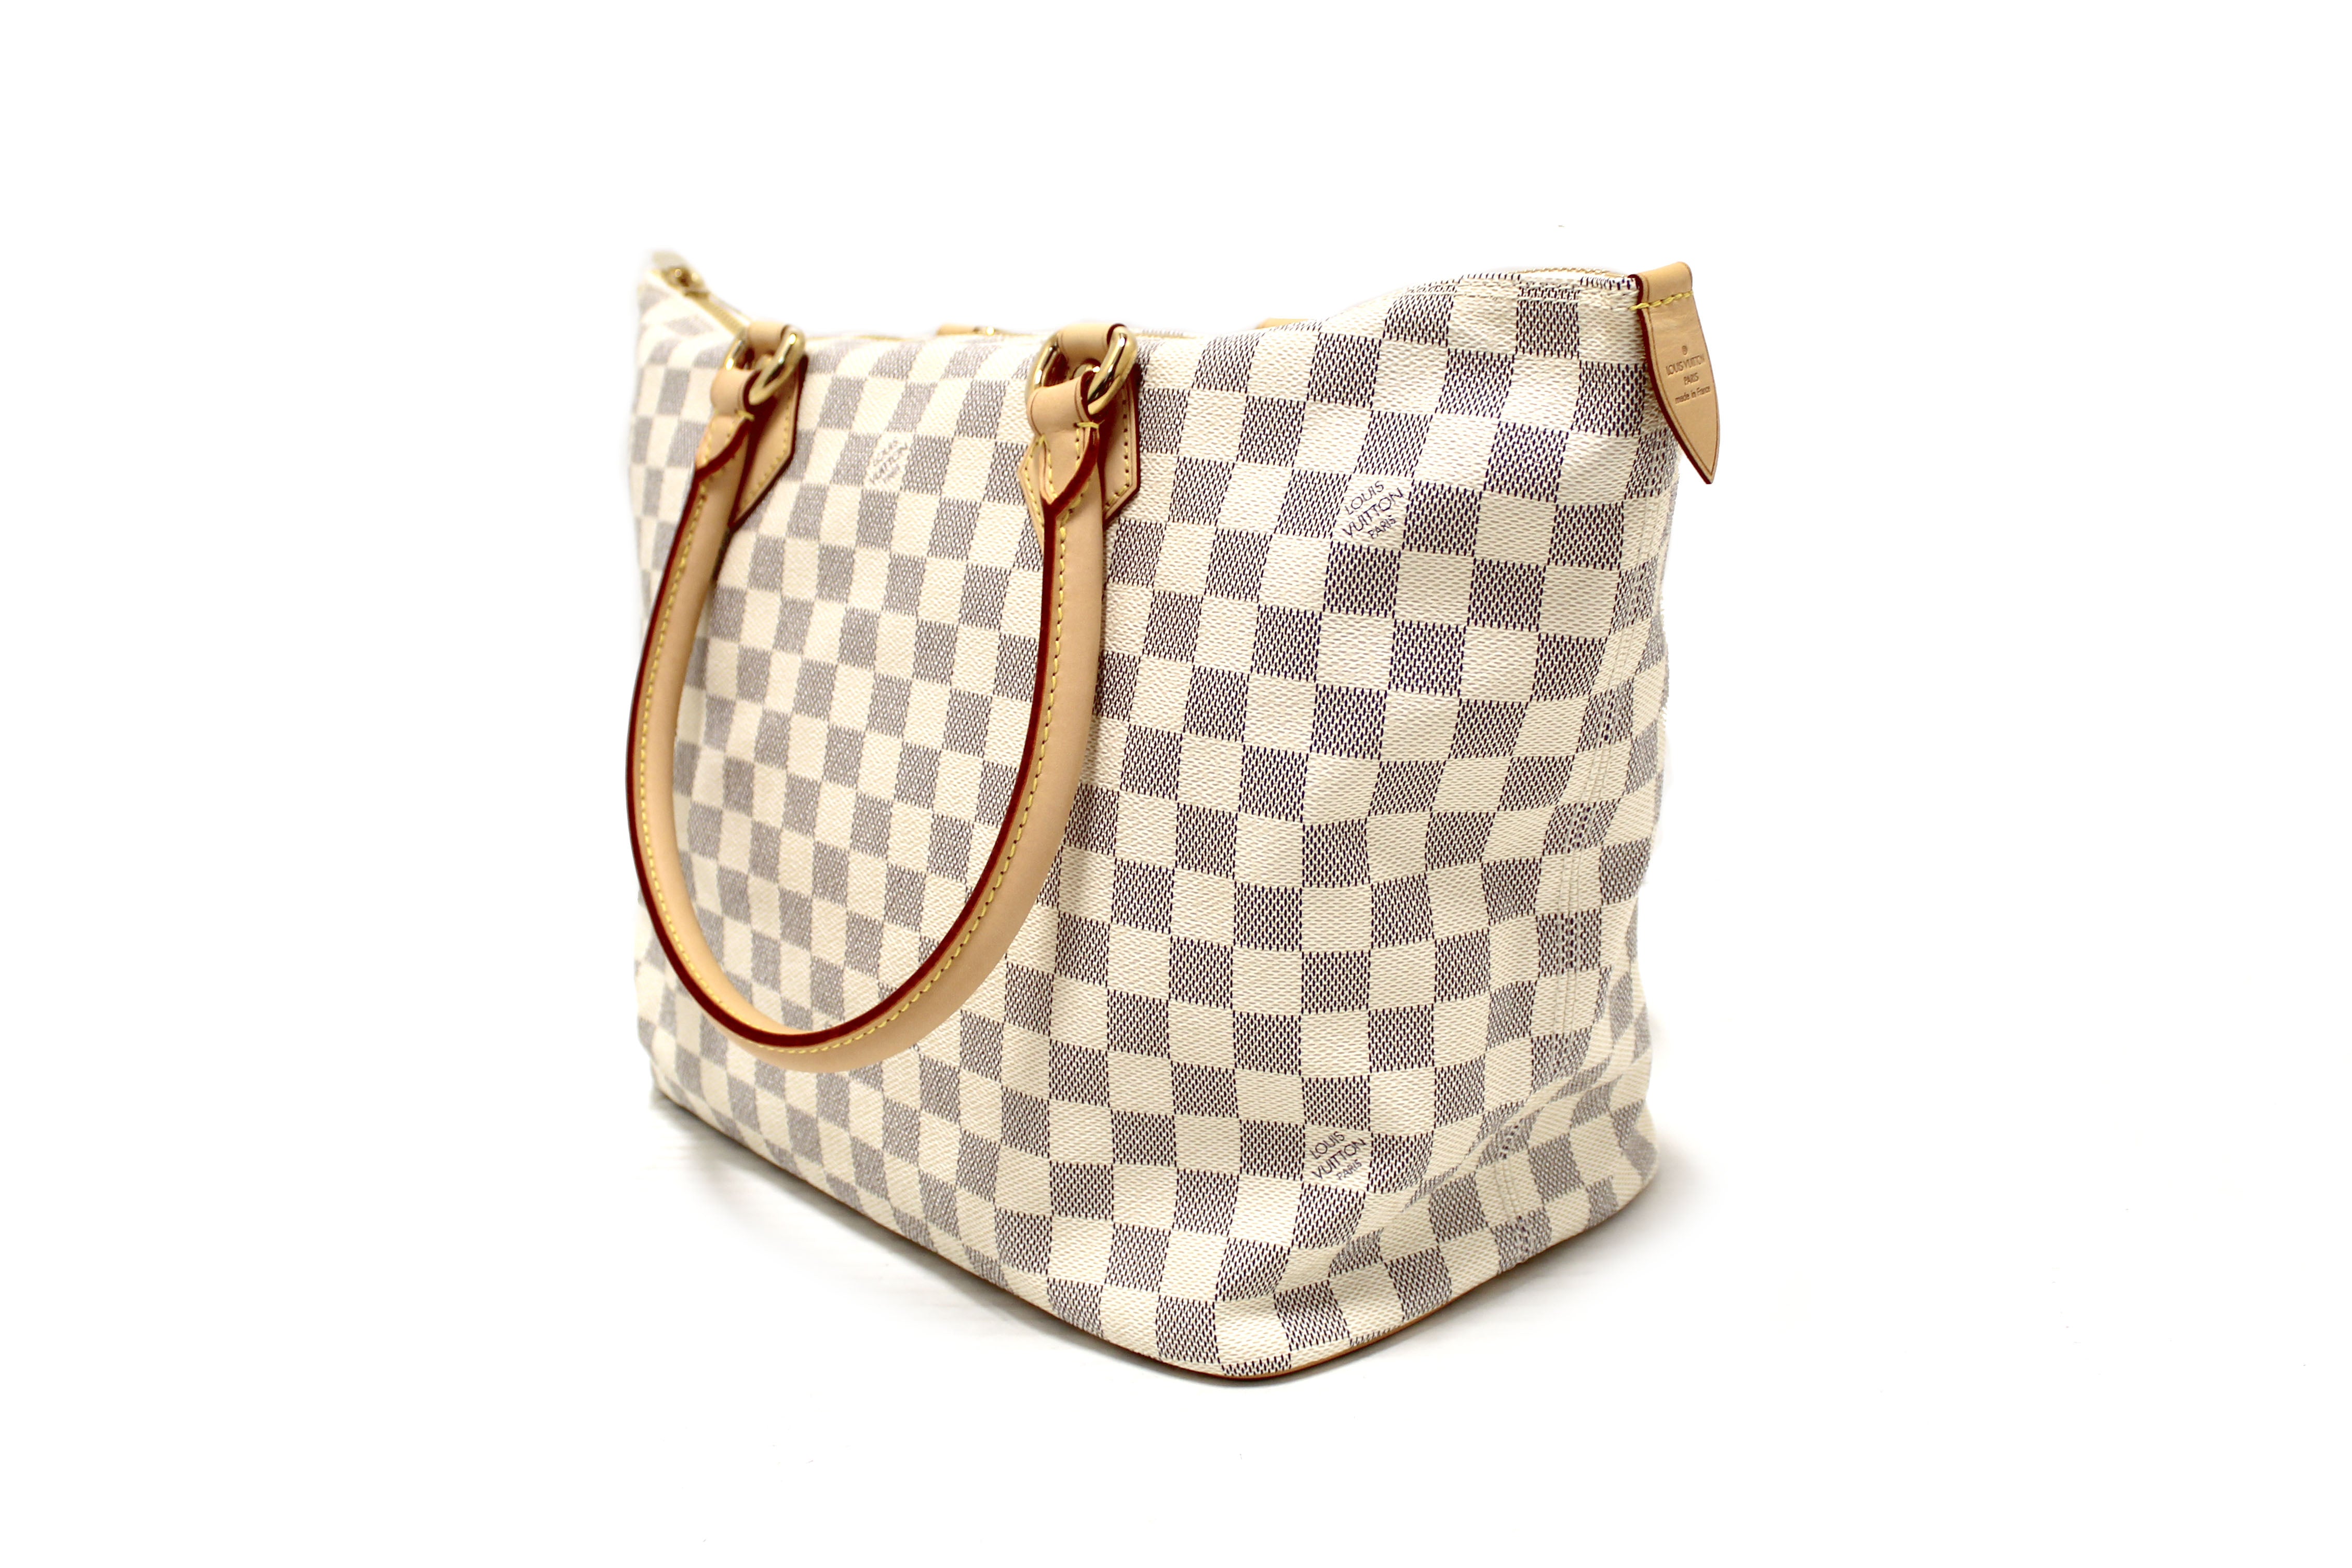 LOUIS VUITTON SALEYA MM DAMIER AZURE, What Fits In My Bag, Review